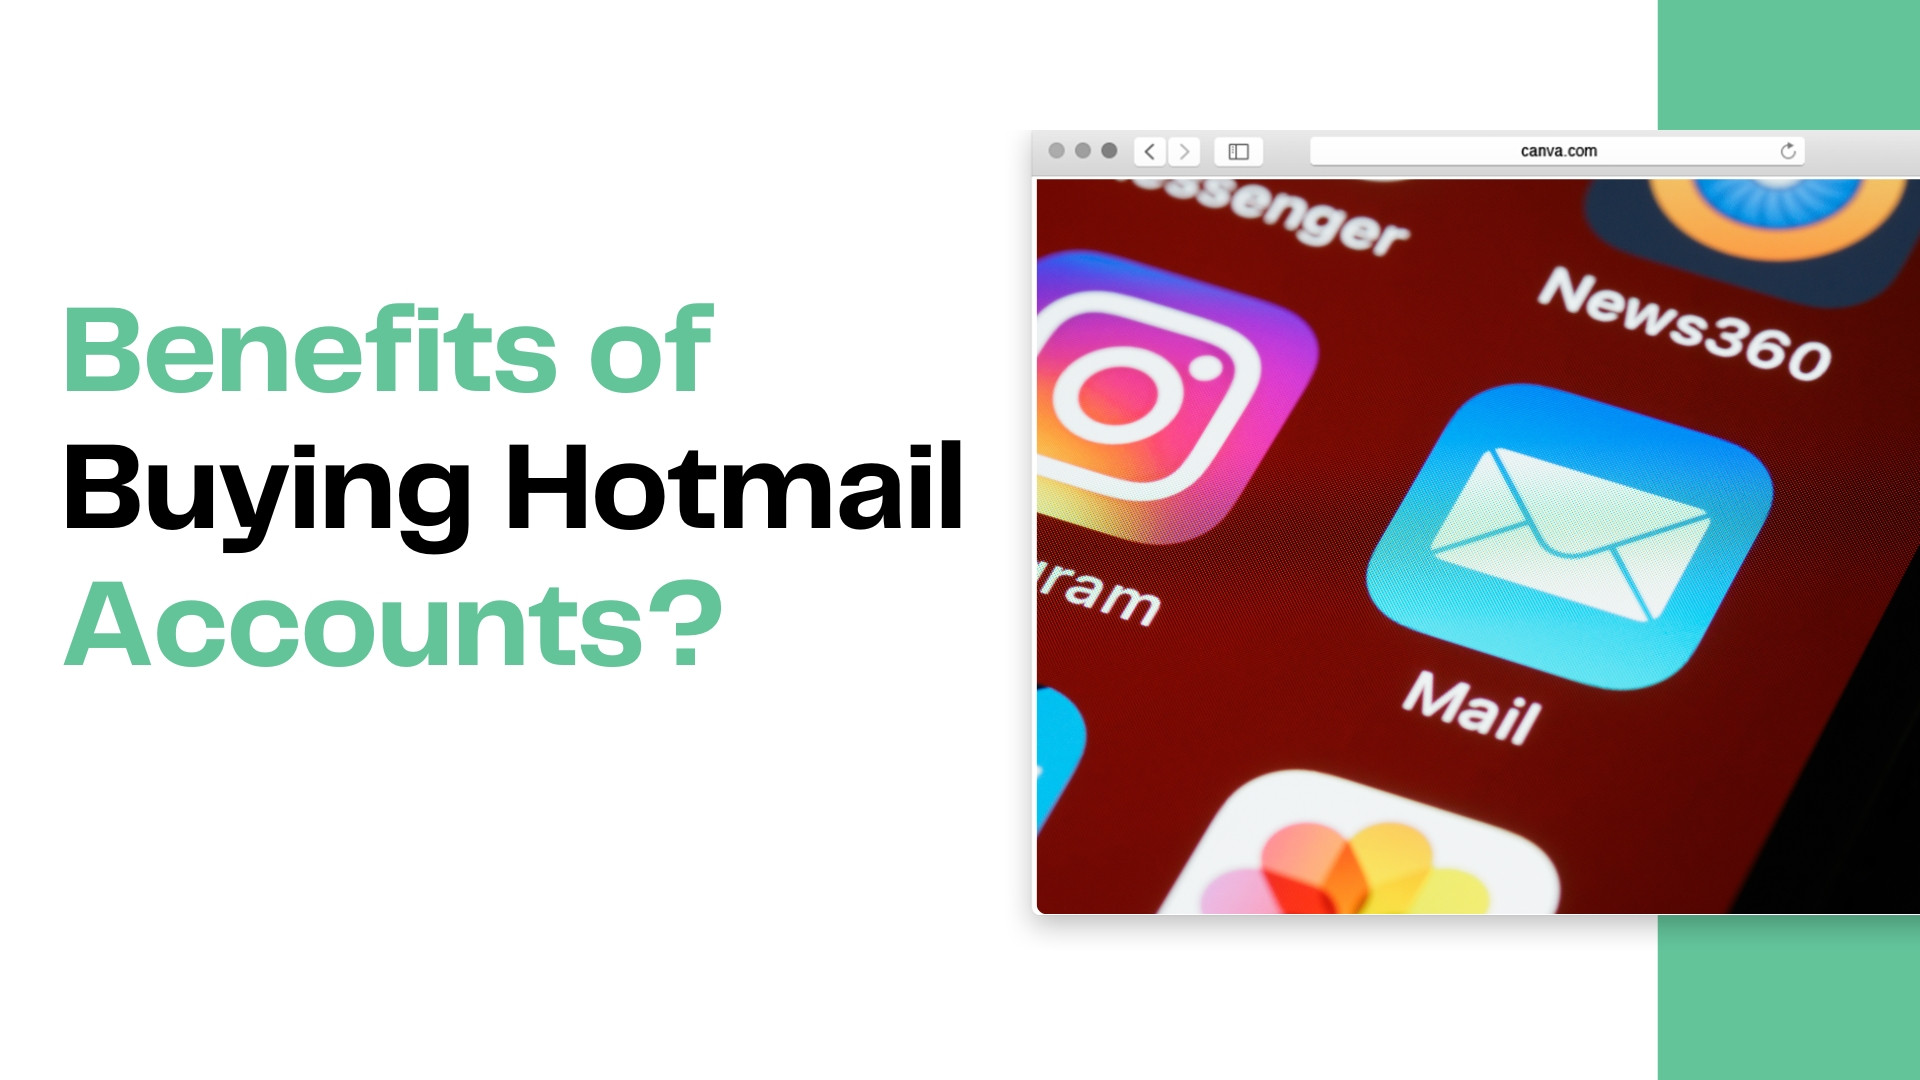 The Benefits of Buying Hotmail Accounts